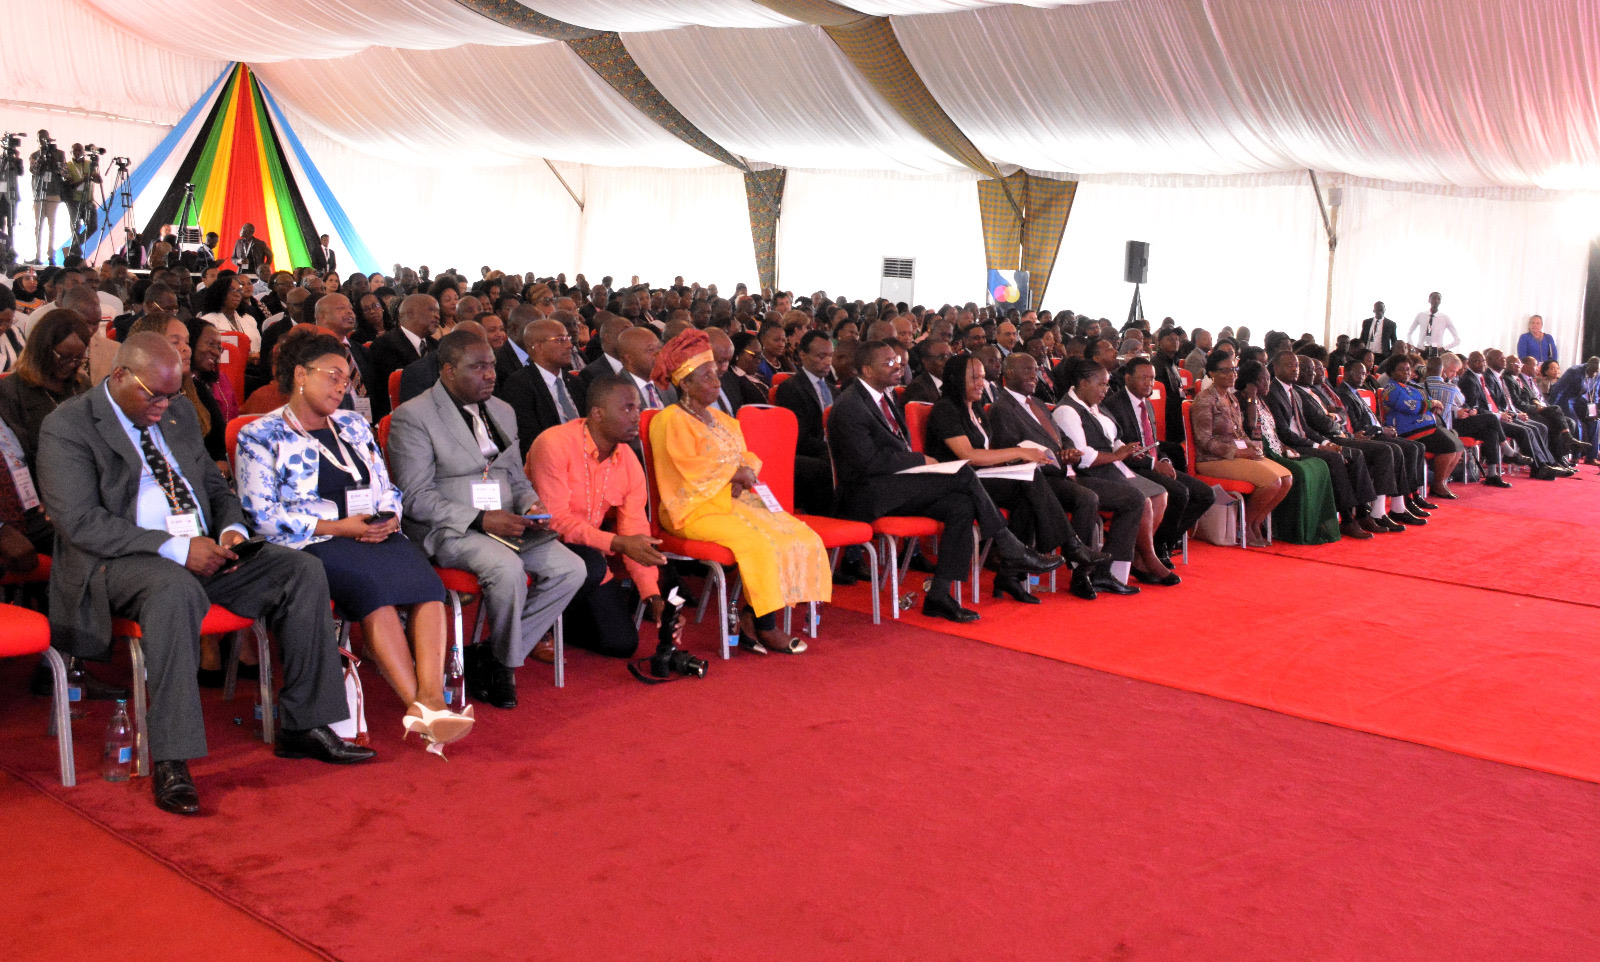 Delegates at the official opening of the 3rd East African Regional Tourism Expo and Magical Kenya Travel Expo, at the Kenyatta International Convention Centre.